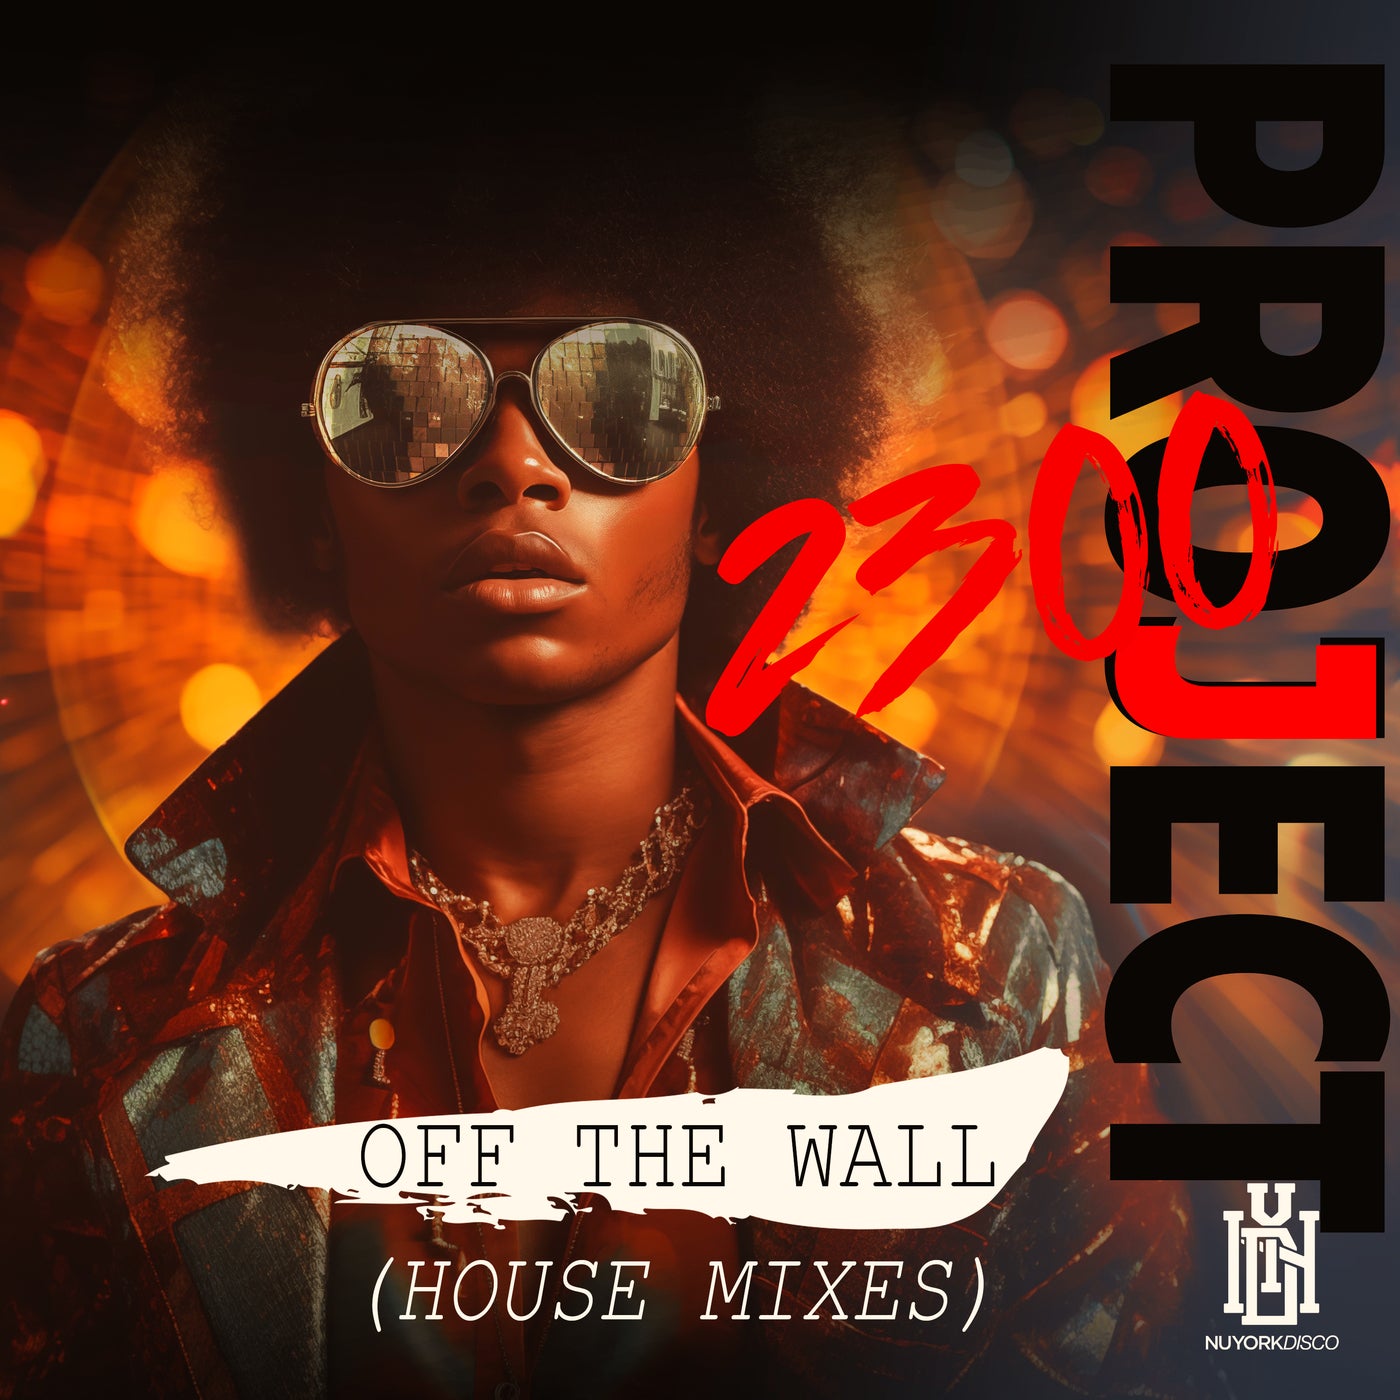 Off the Wall (House Mixes)